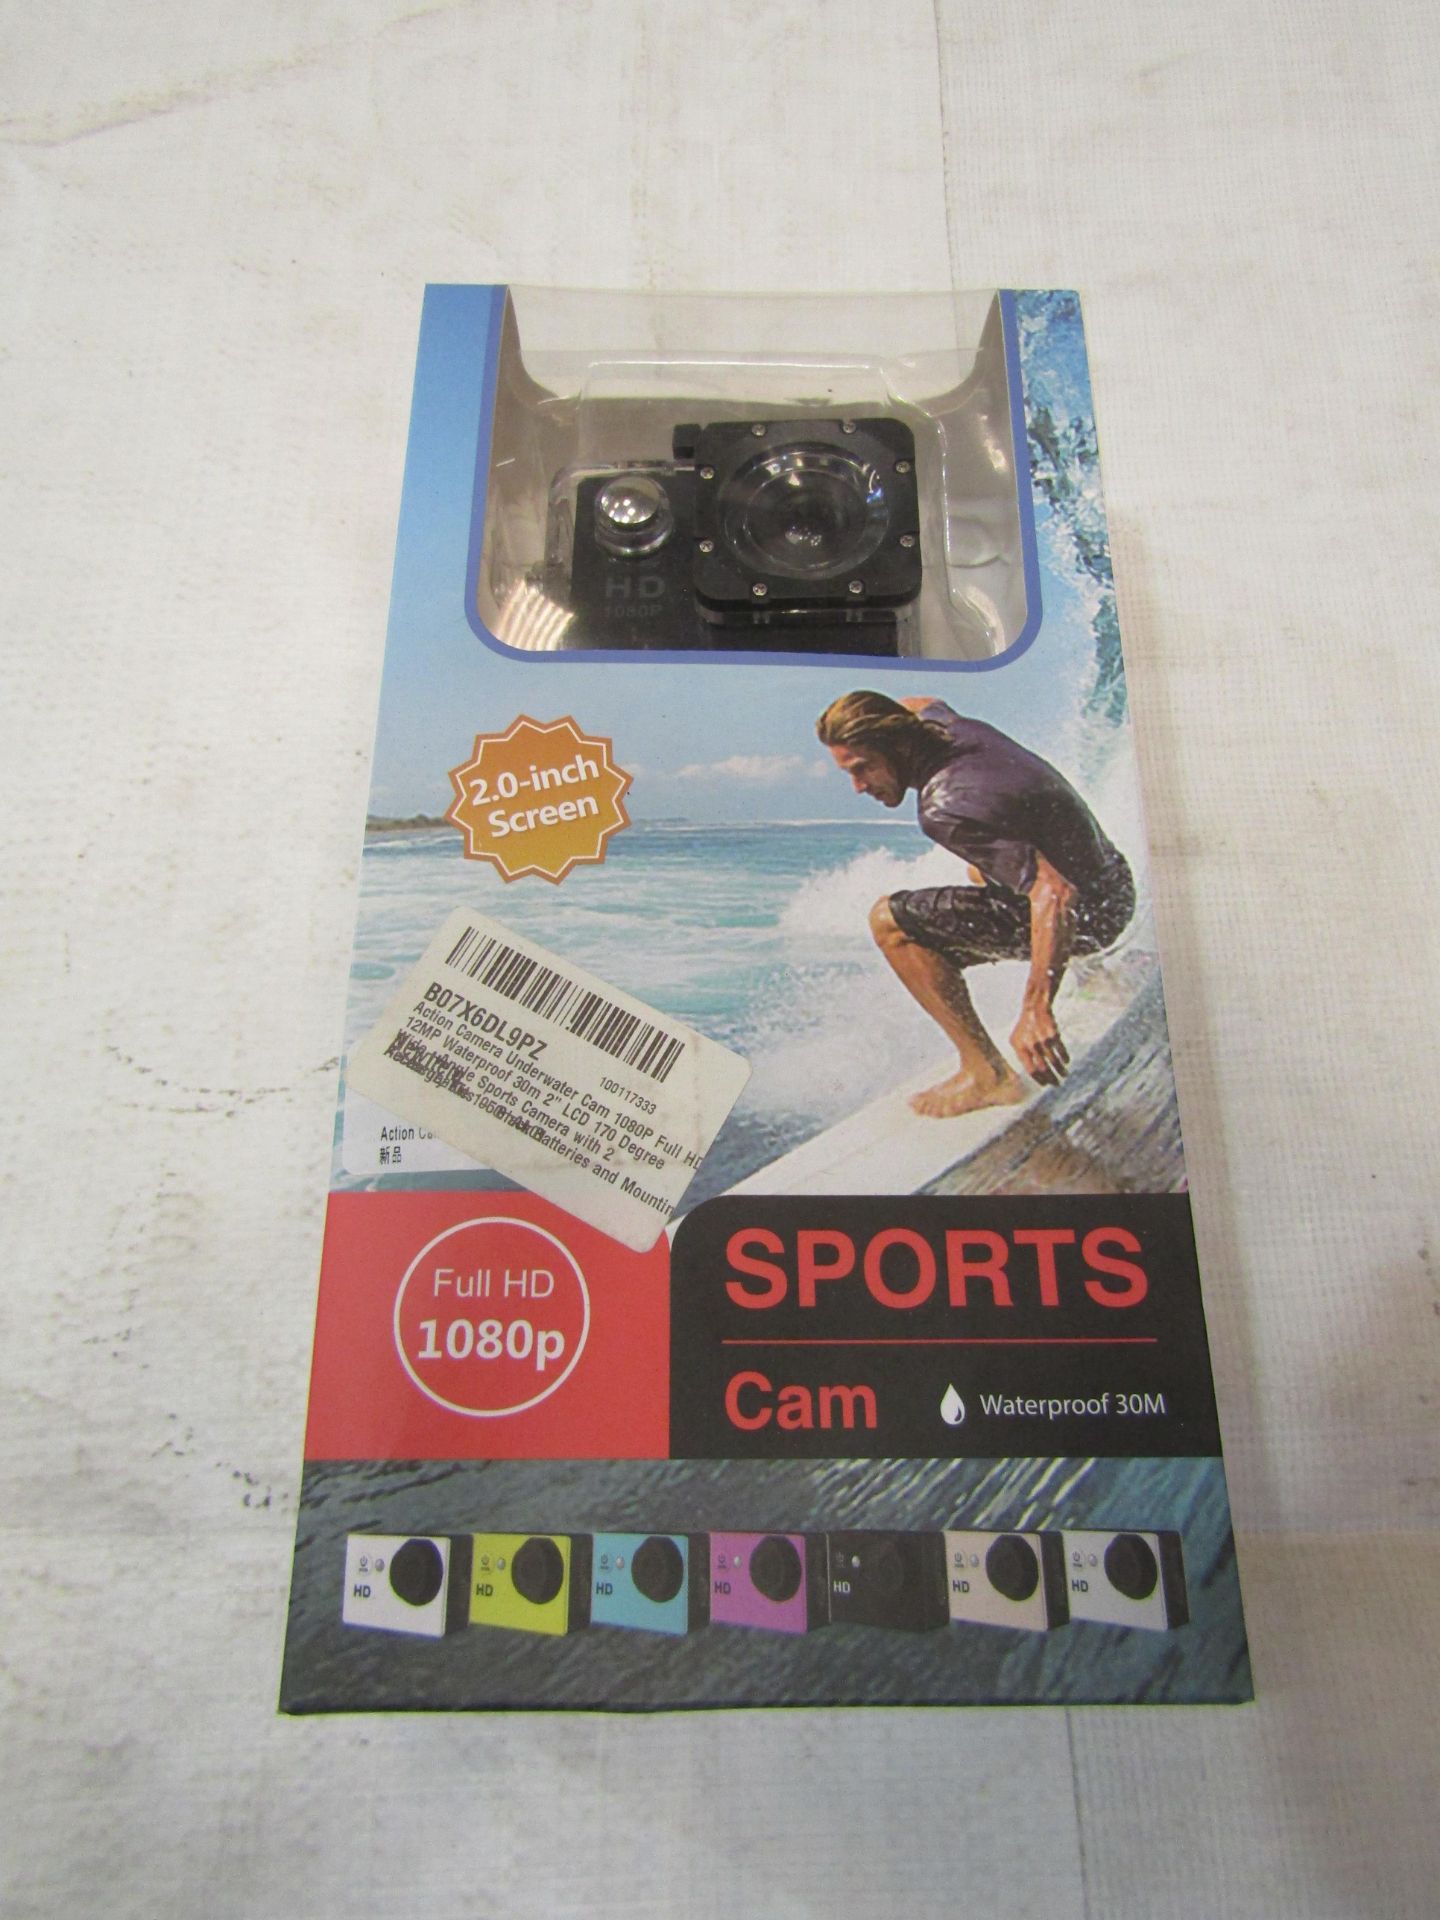 1080p Sports Camera, Waterproof To 30m, Full HD, 12mp LCD 170 Degree Wide Angle - Unchecked &